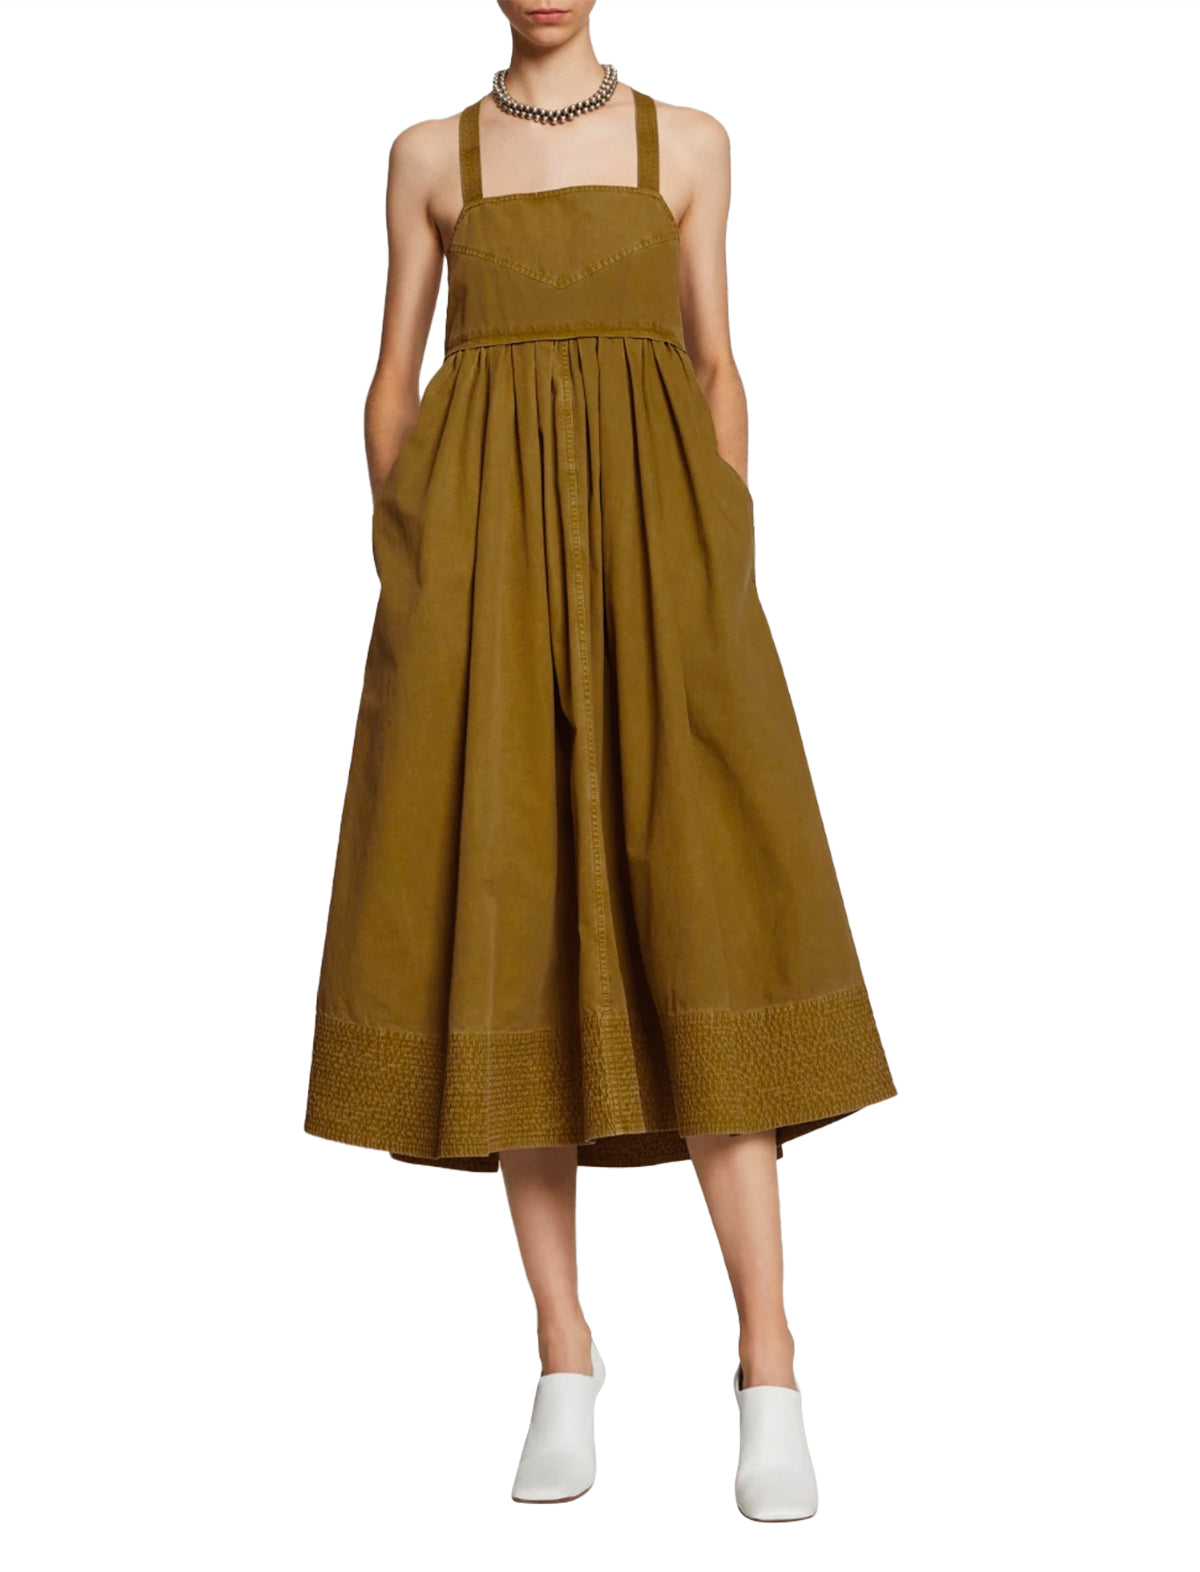 PROENZA SCHOULER WHITE LABEL Washed Apron Dress In Moss